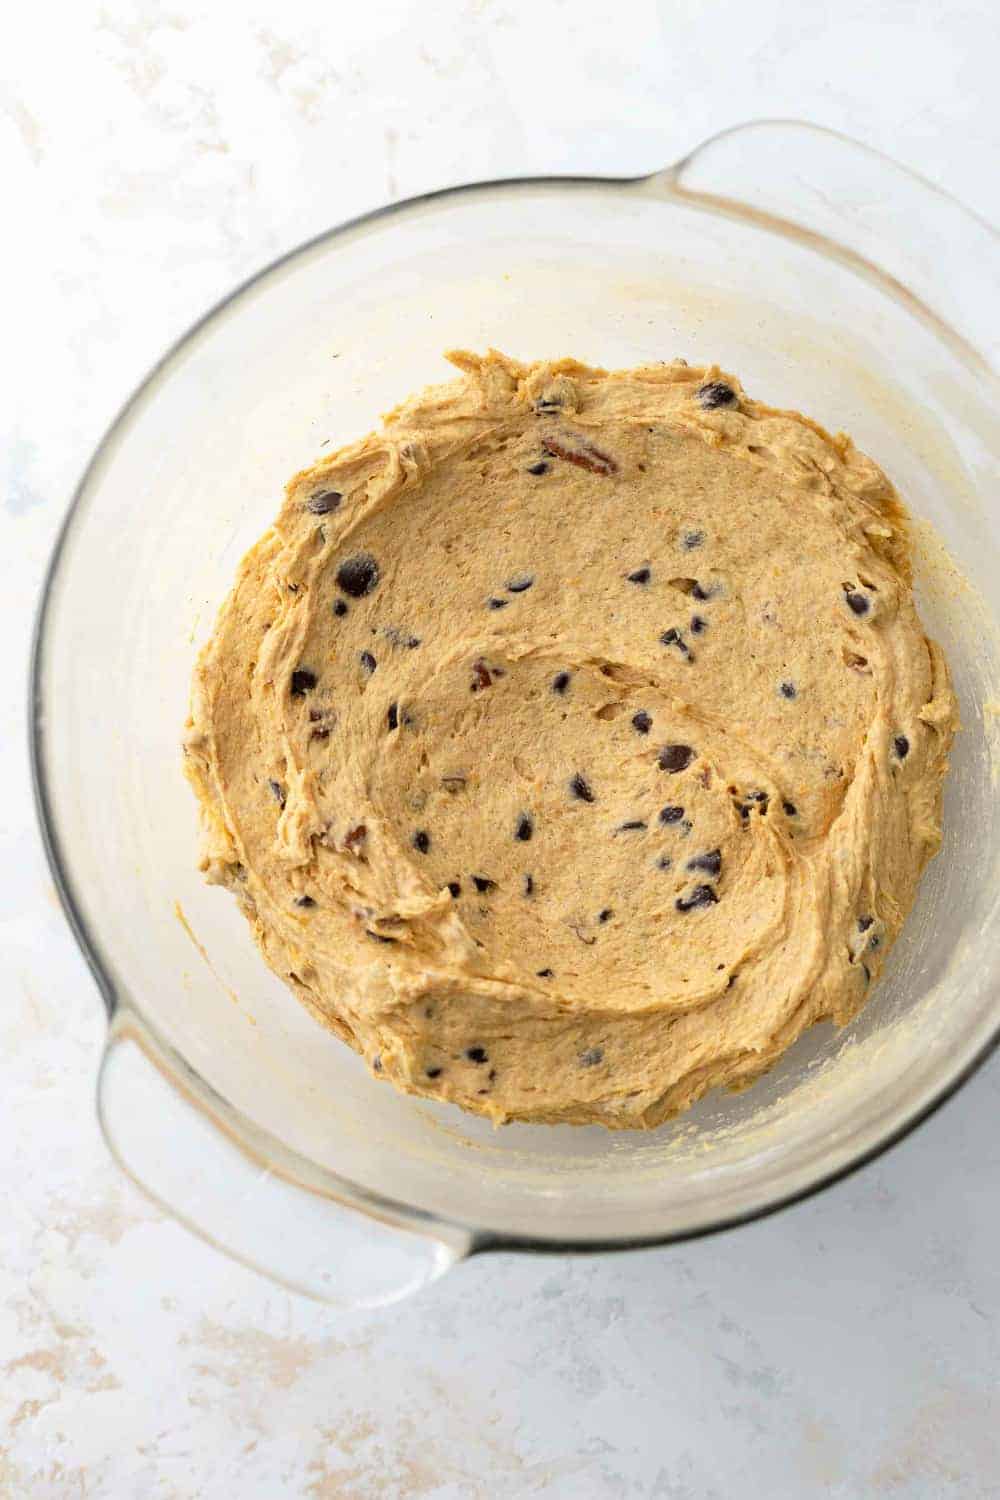 Pumpkin blondie batter with chocolate chips in a glass mixing bowl